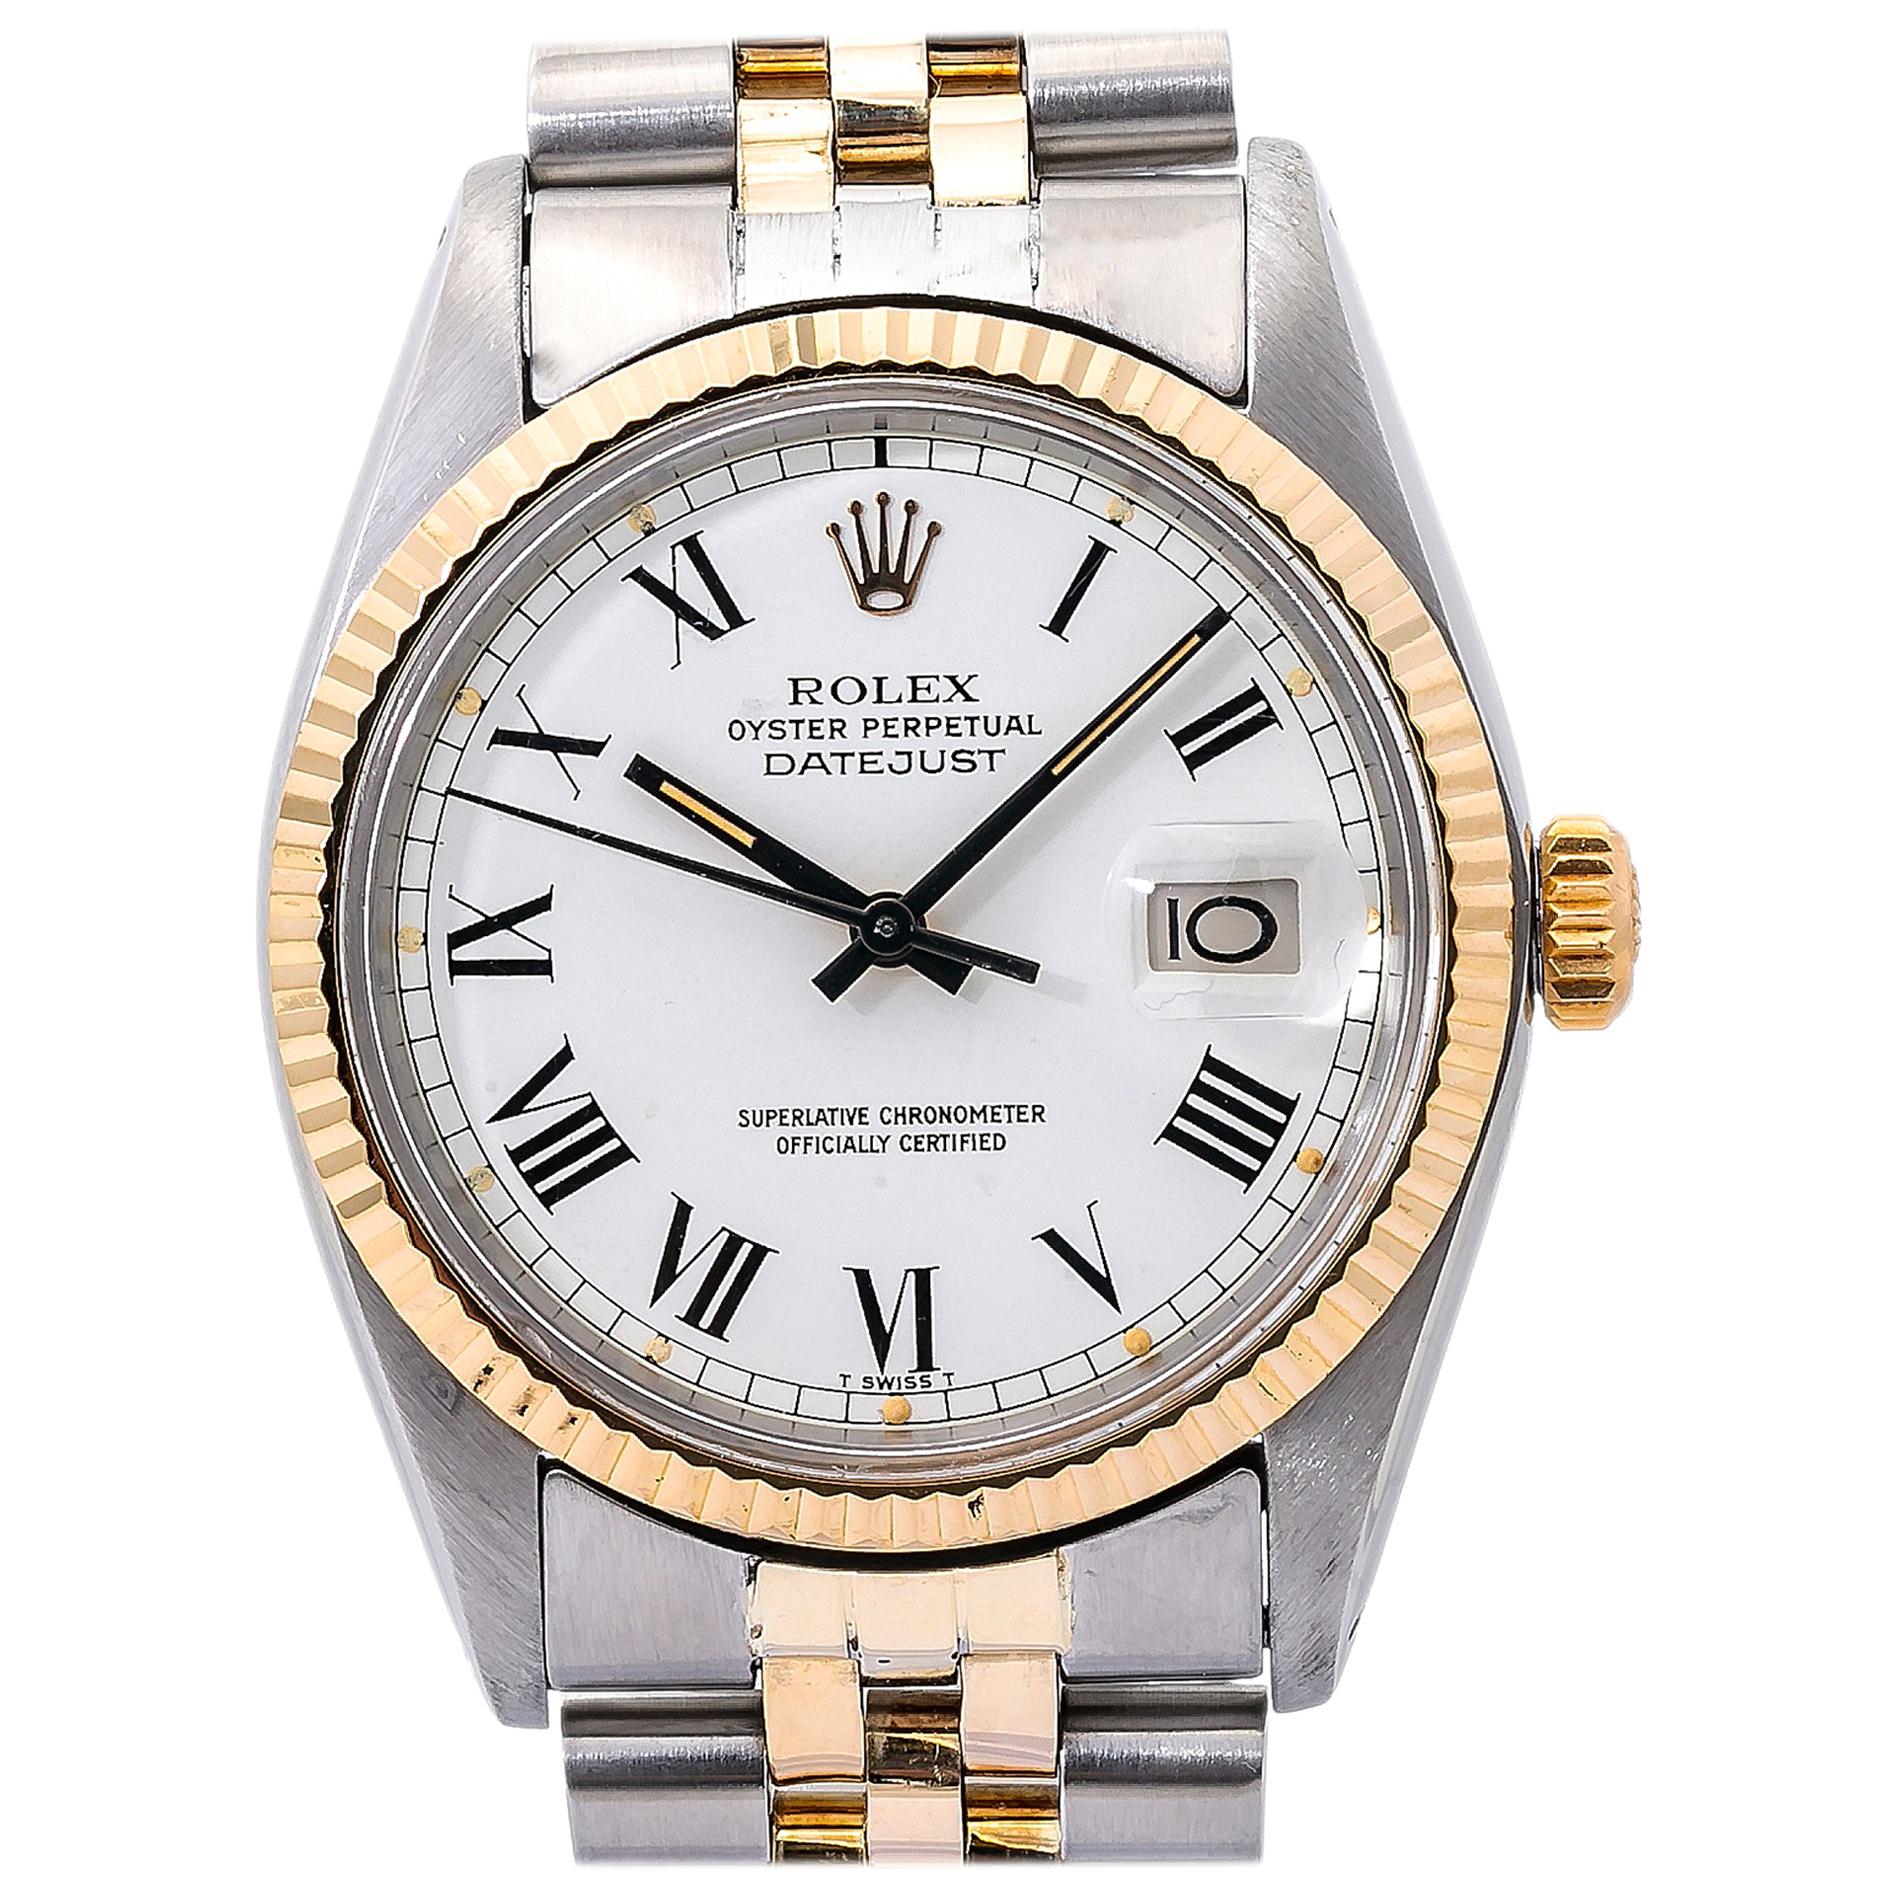 Rolex Datejust 16000, White Dial, Certified and Warranty